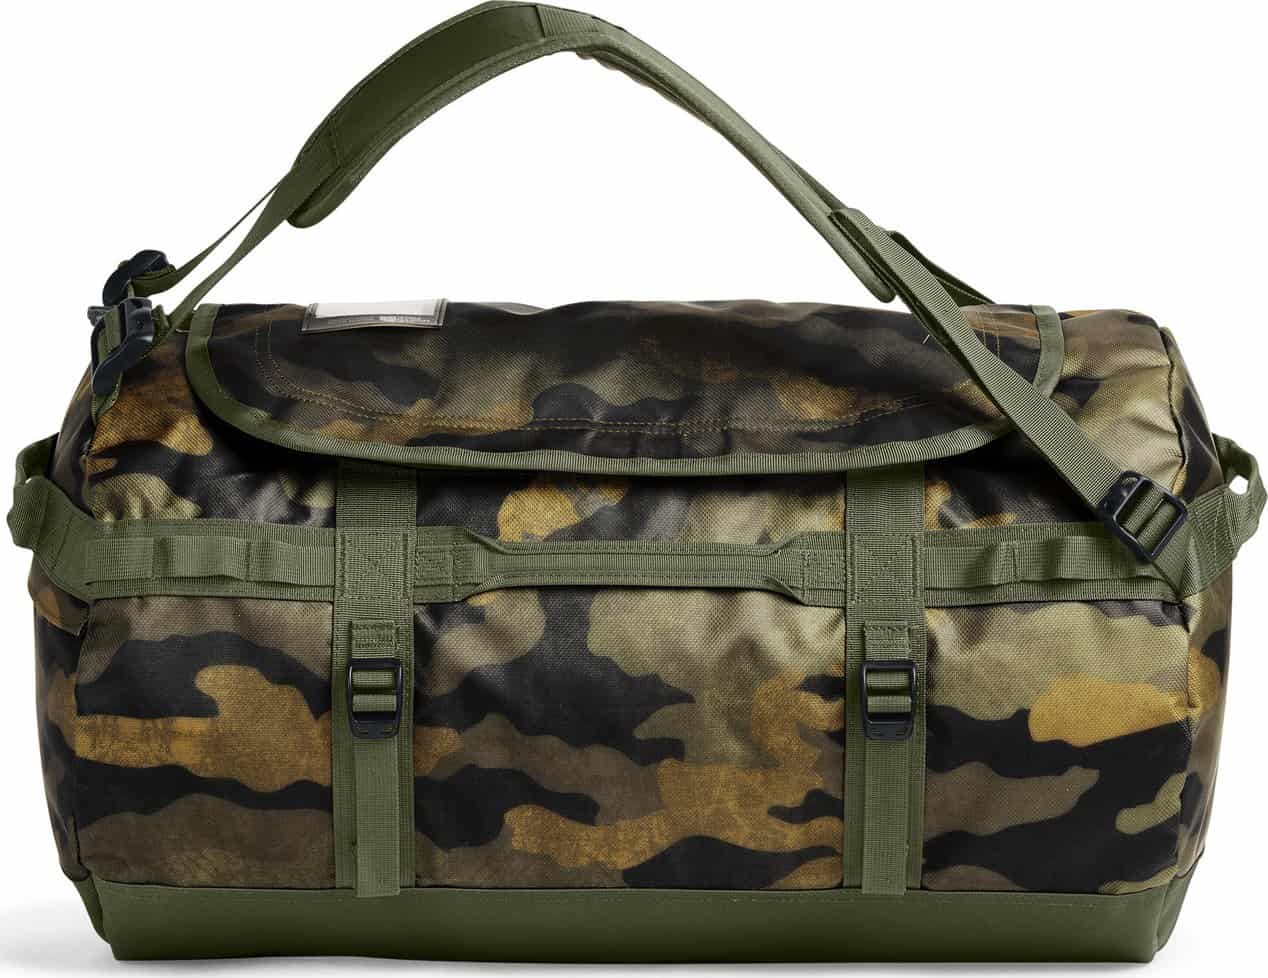 Base Camp Duffel Bag by The North Face